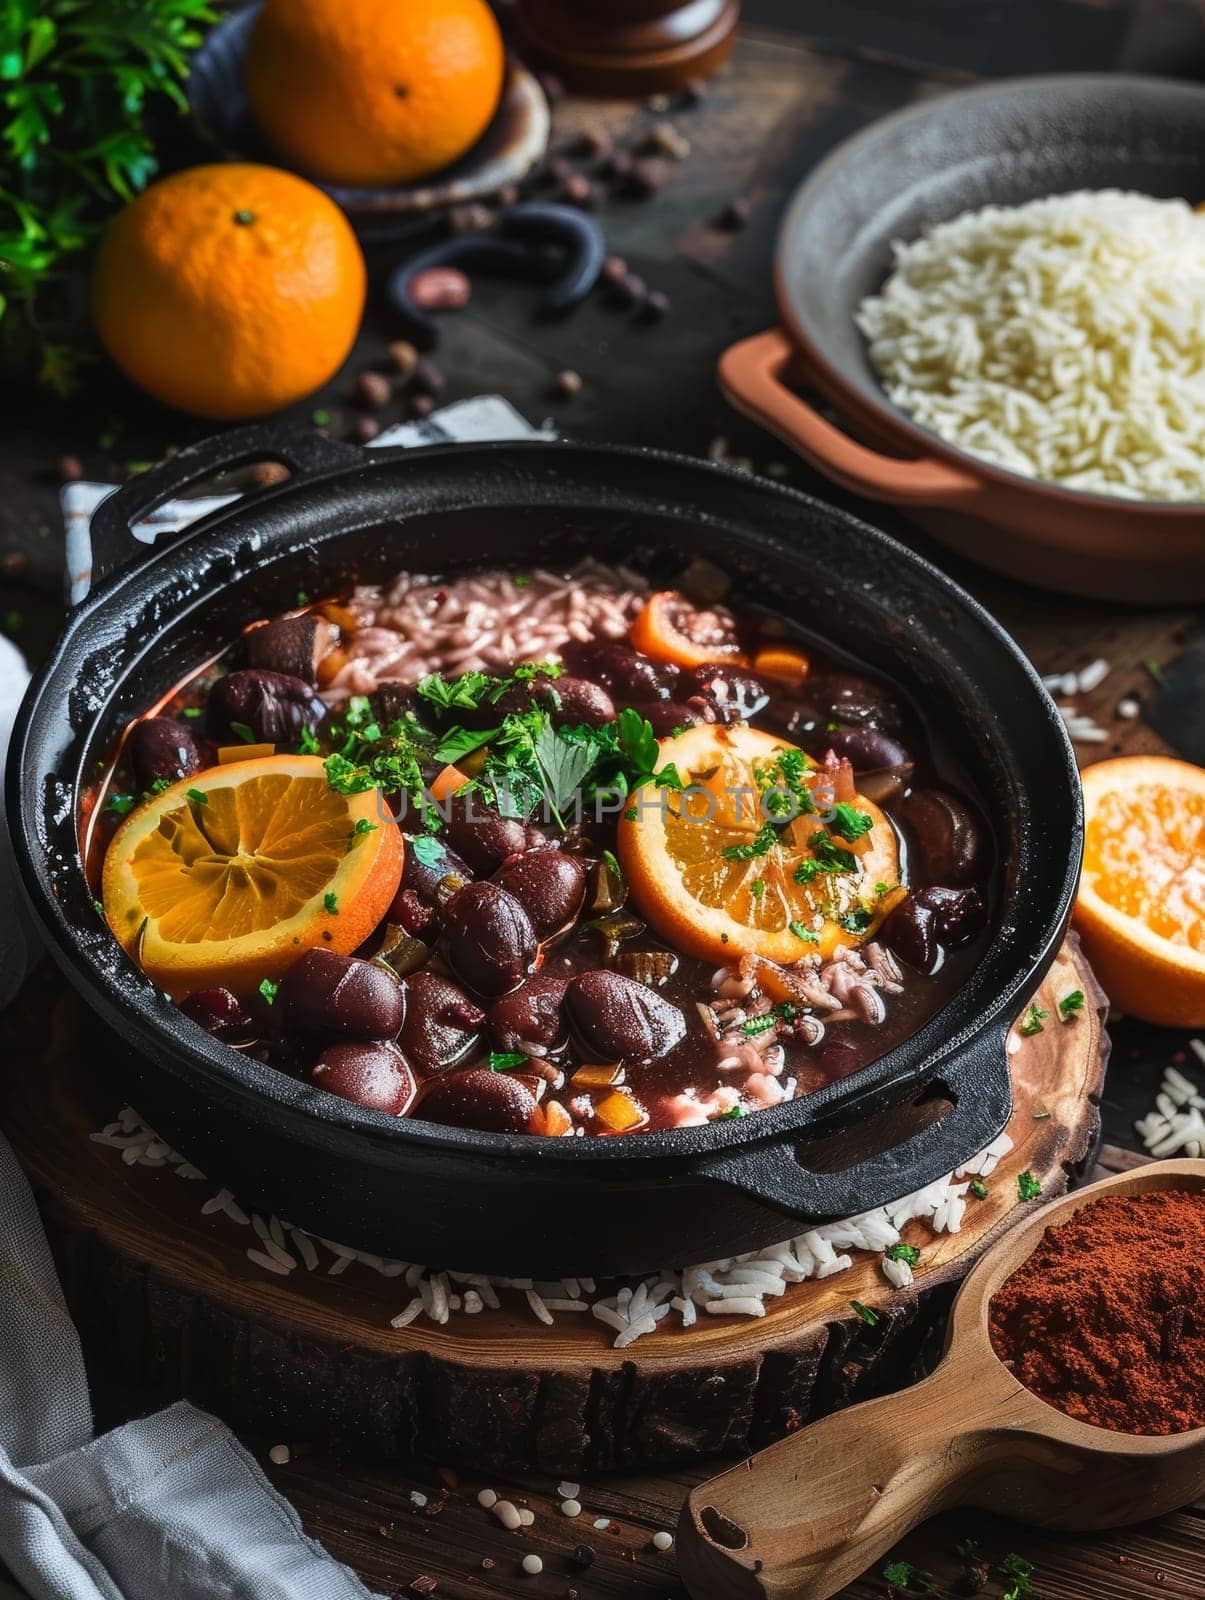 Authentic Brazilian feijoada, a traditional stew made with a variety of meats and beans, served in a cast-iron pot and accompanied by fragrant rice, refreshing oranges, and crunchy texture of farofa